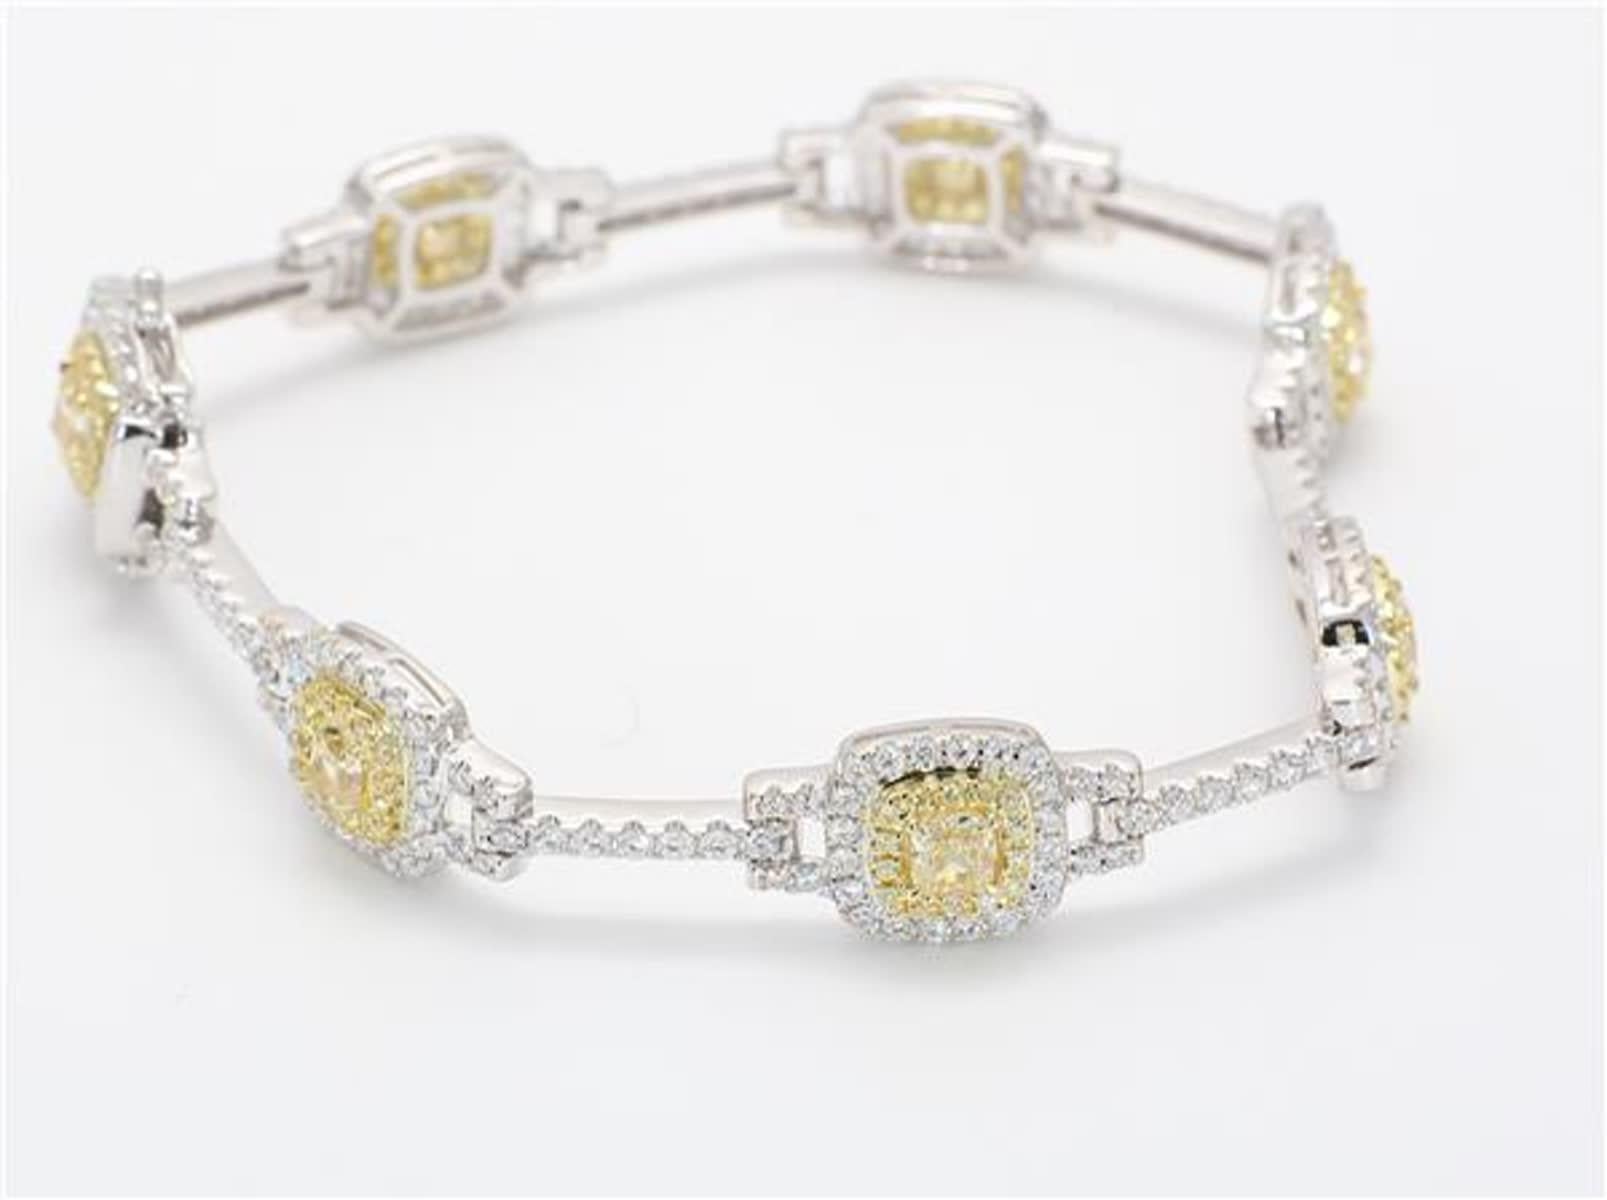 Radiant Cut Natural Yellow Radiant and White Diamond 5.48 Carat TW Gold Bracelet